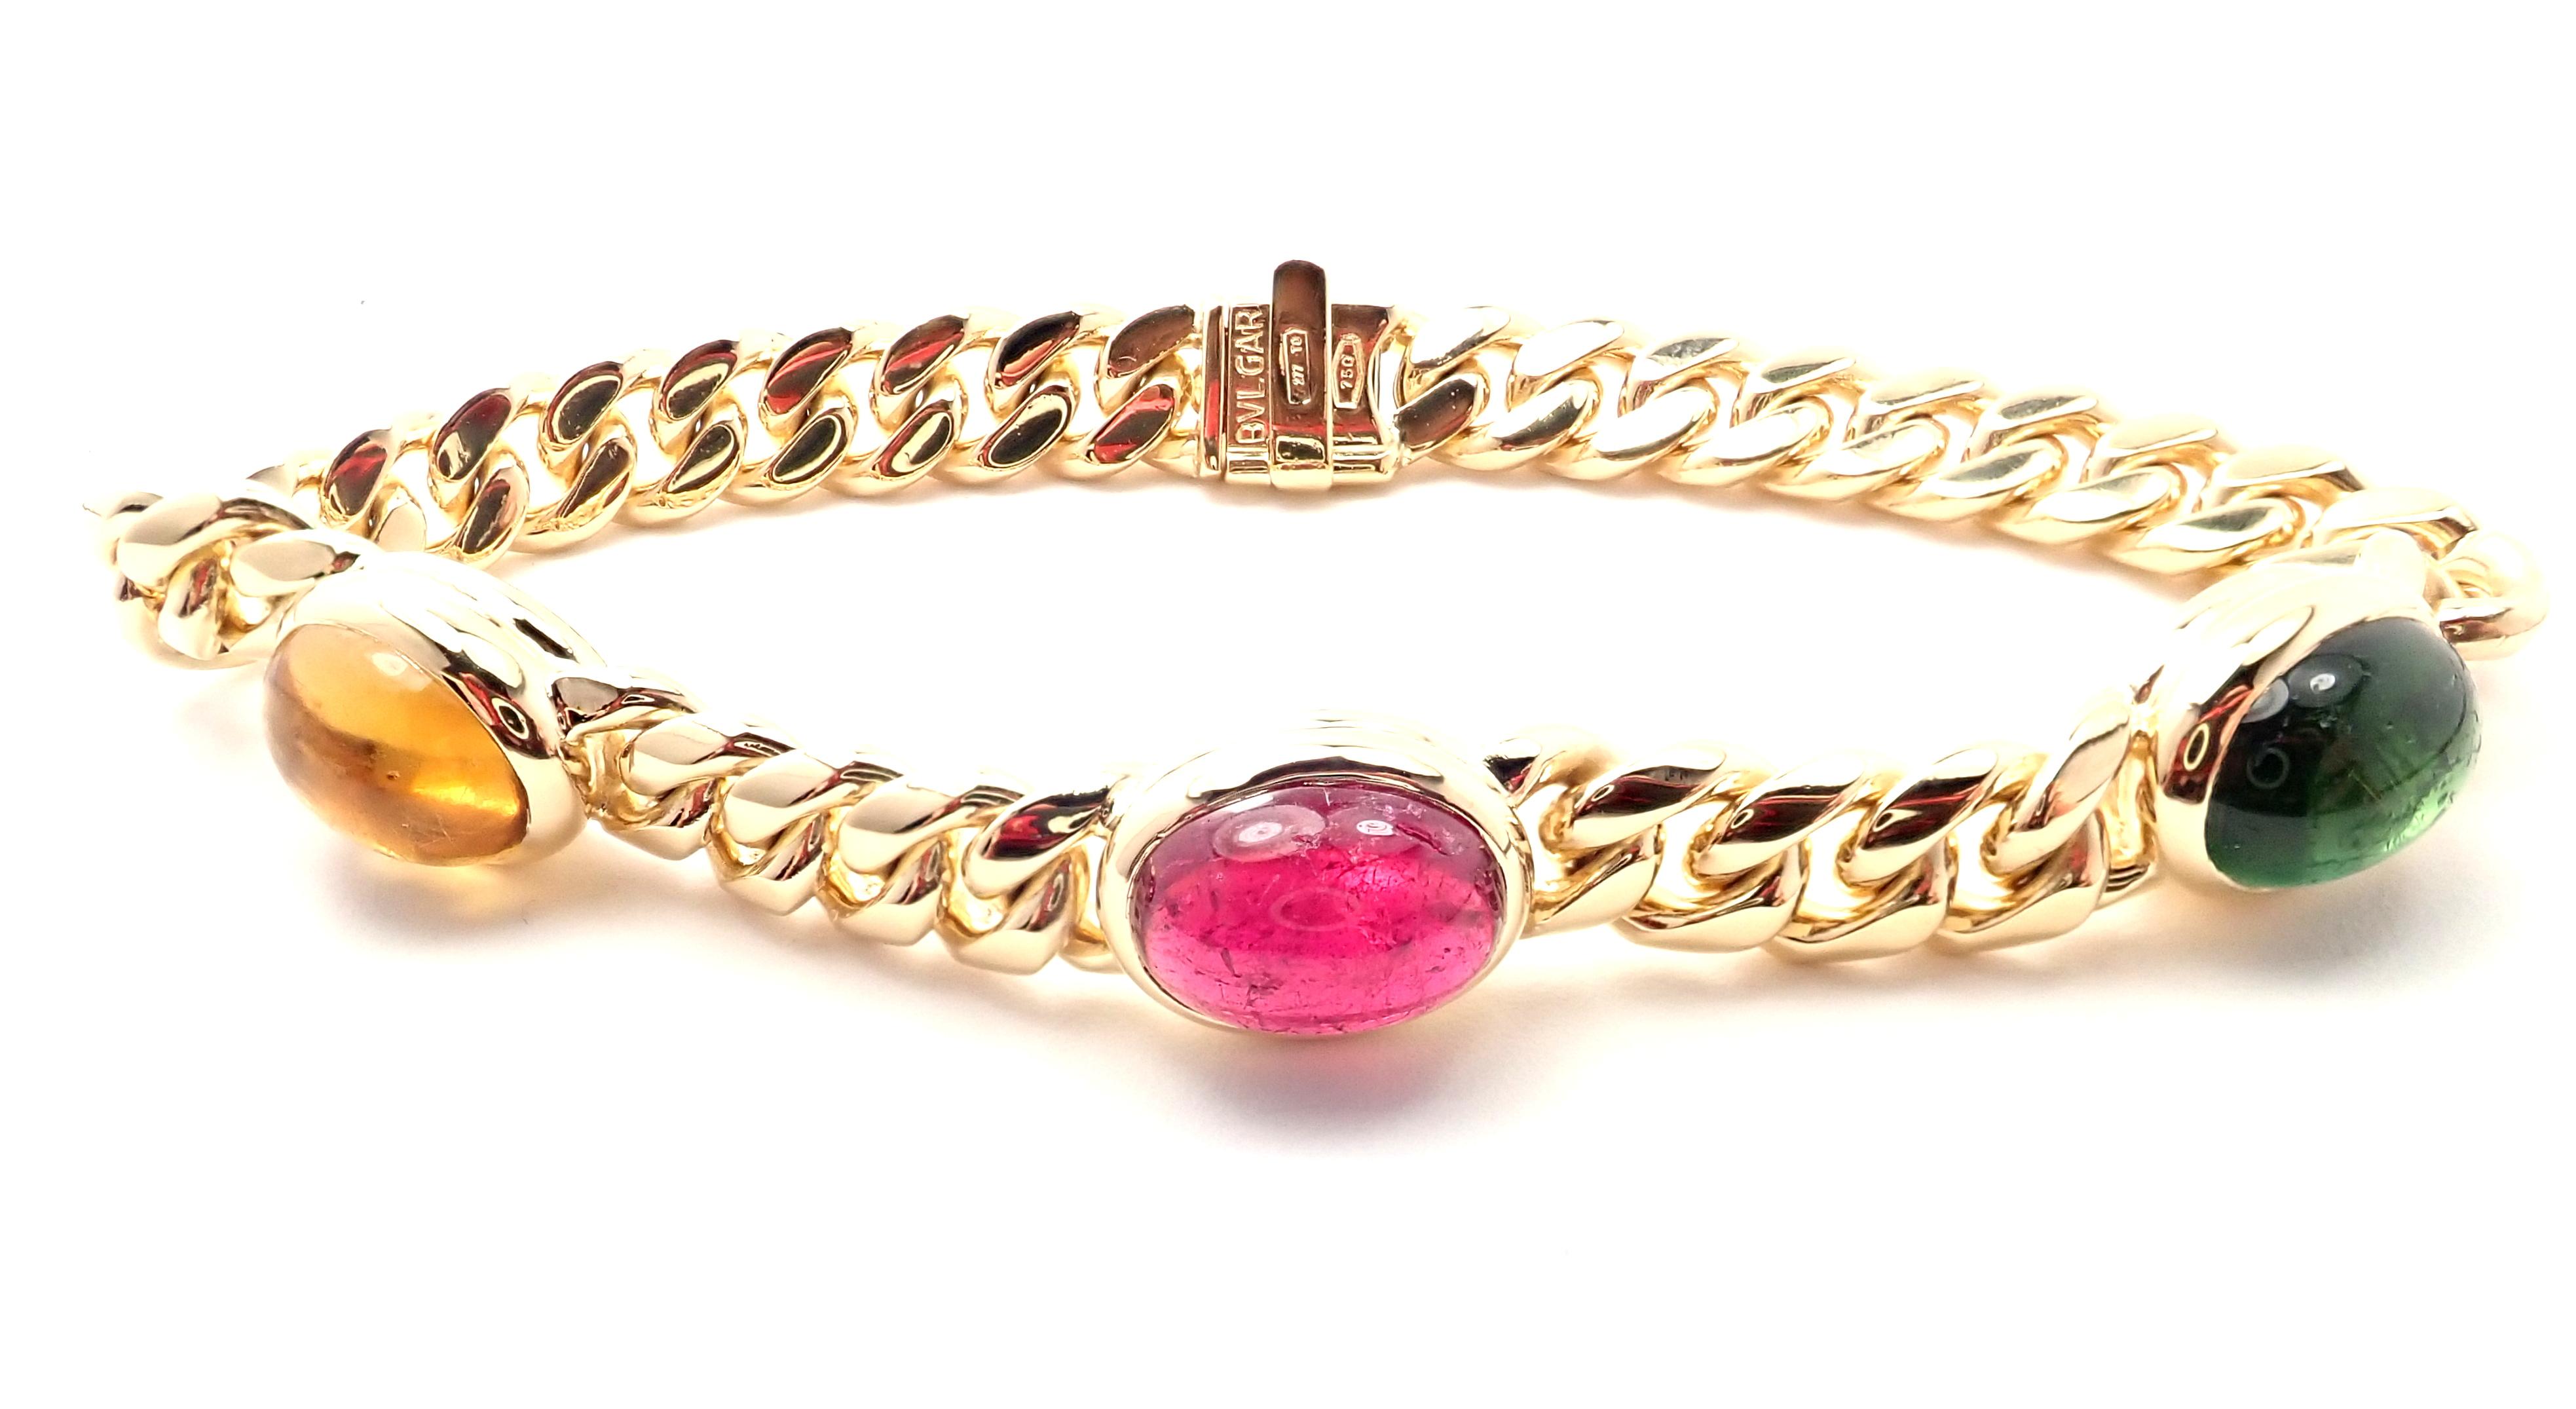 18k Yellow Gold Emerald Ruby And Yellow Sapphire Link Bracelet by Bulgari. 
With 1 oval ruby 10mm x 13mm approximately 3.5ct
1 oval emerald 10mm x 13mm approximately 3.5ct
1 oval yellow sapphire 10mm x 13mm approximately 3.5ct
Details: 
Weight: 37.1